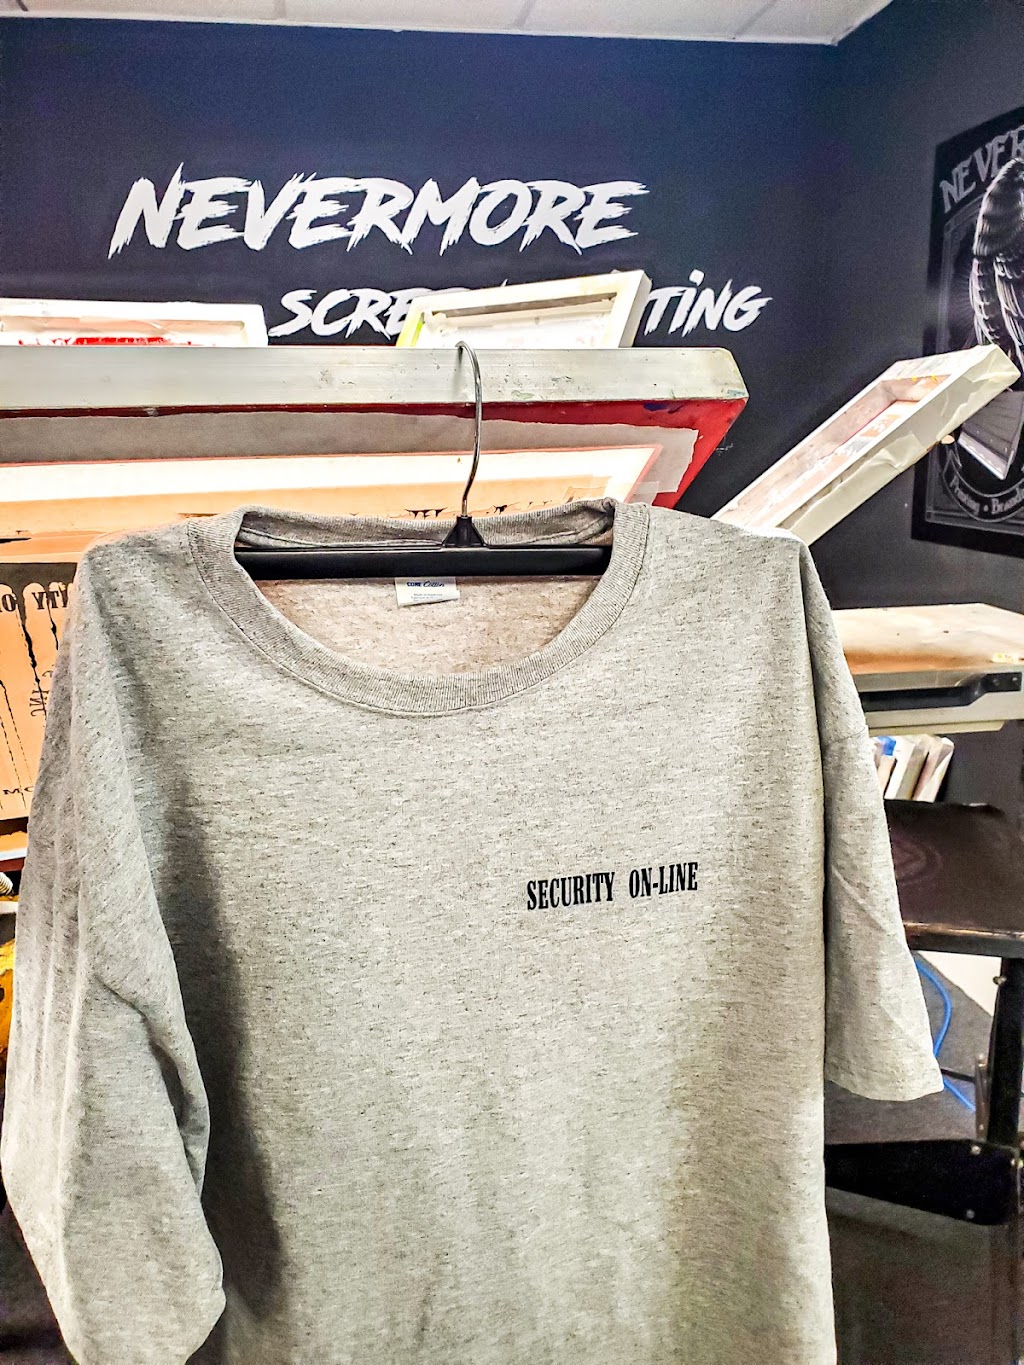 Nevermore screen printing | 206 reetz ave, Hulmeville Rd, Hulmeville, PA 19047 | Phone: (215) 550-1075